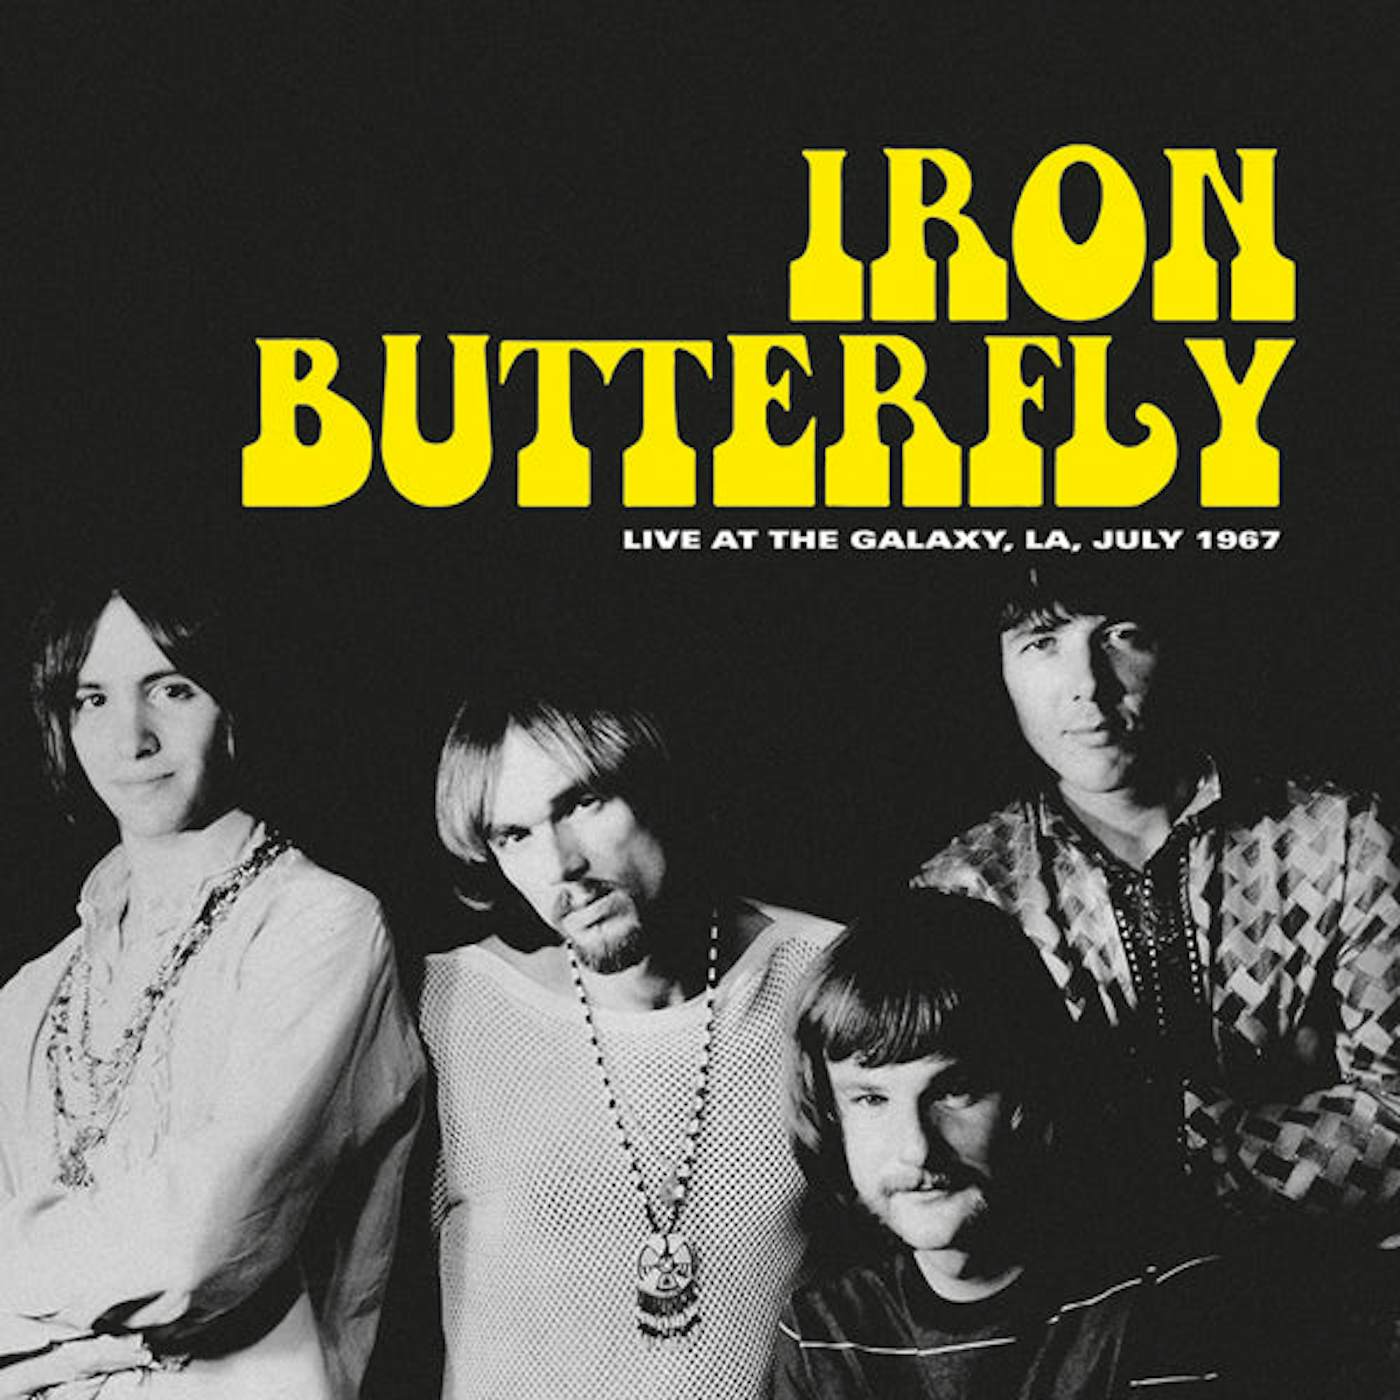 Iron Butterfly LP - Live At The Galaxy, La, July 1967 (Vinyl)